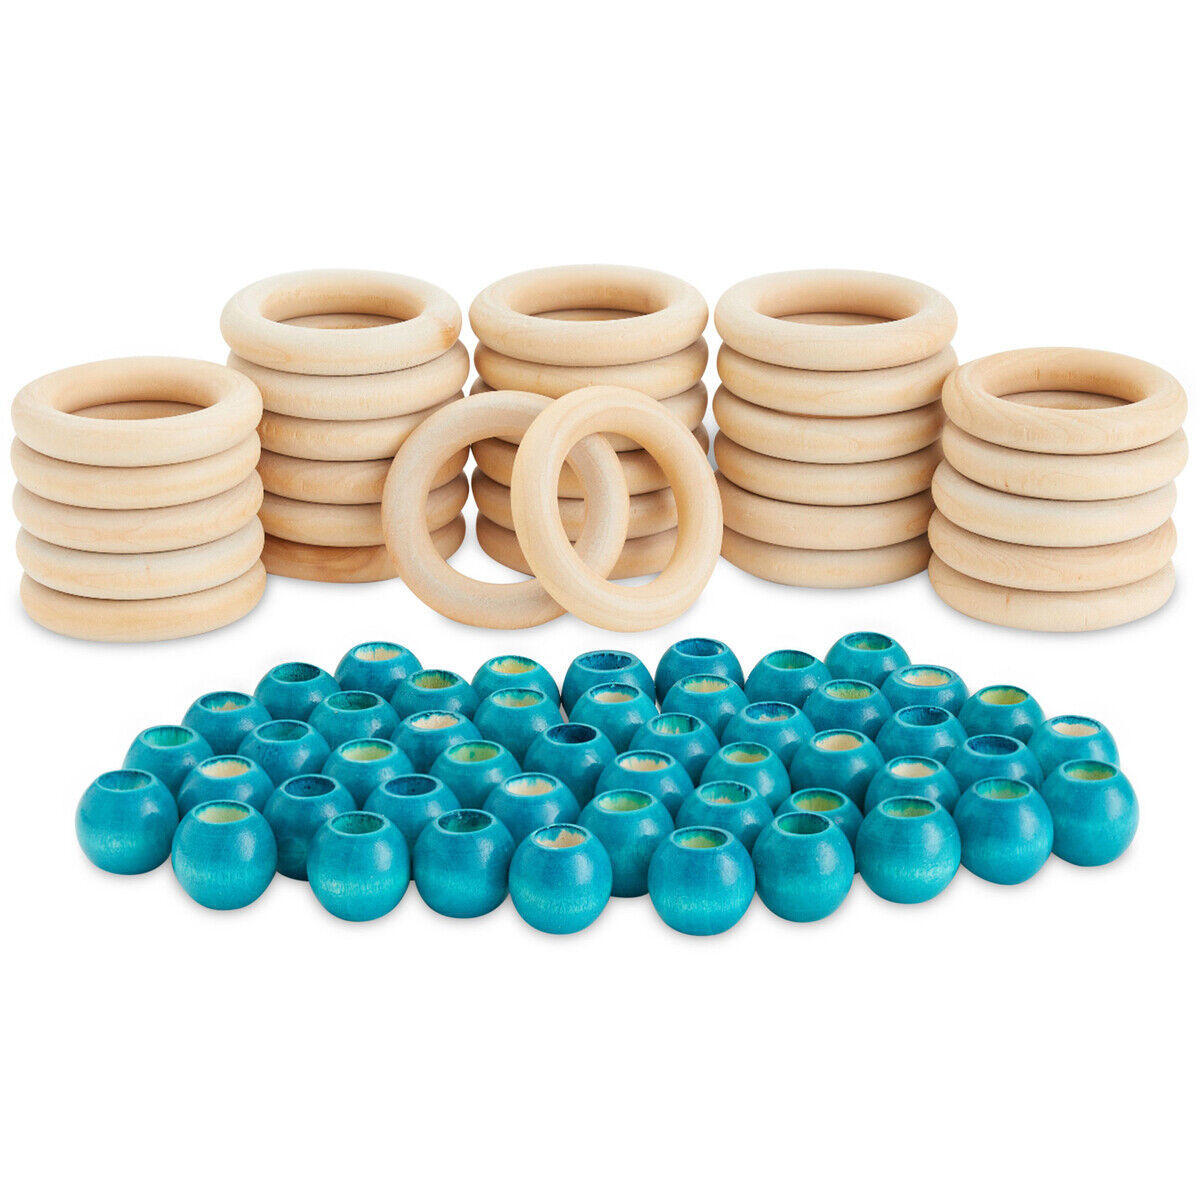 Primary image for 80 Pieces Macrame Making Set, Unfinished Teal Wood Beads Wooden Rings For Crafts